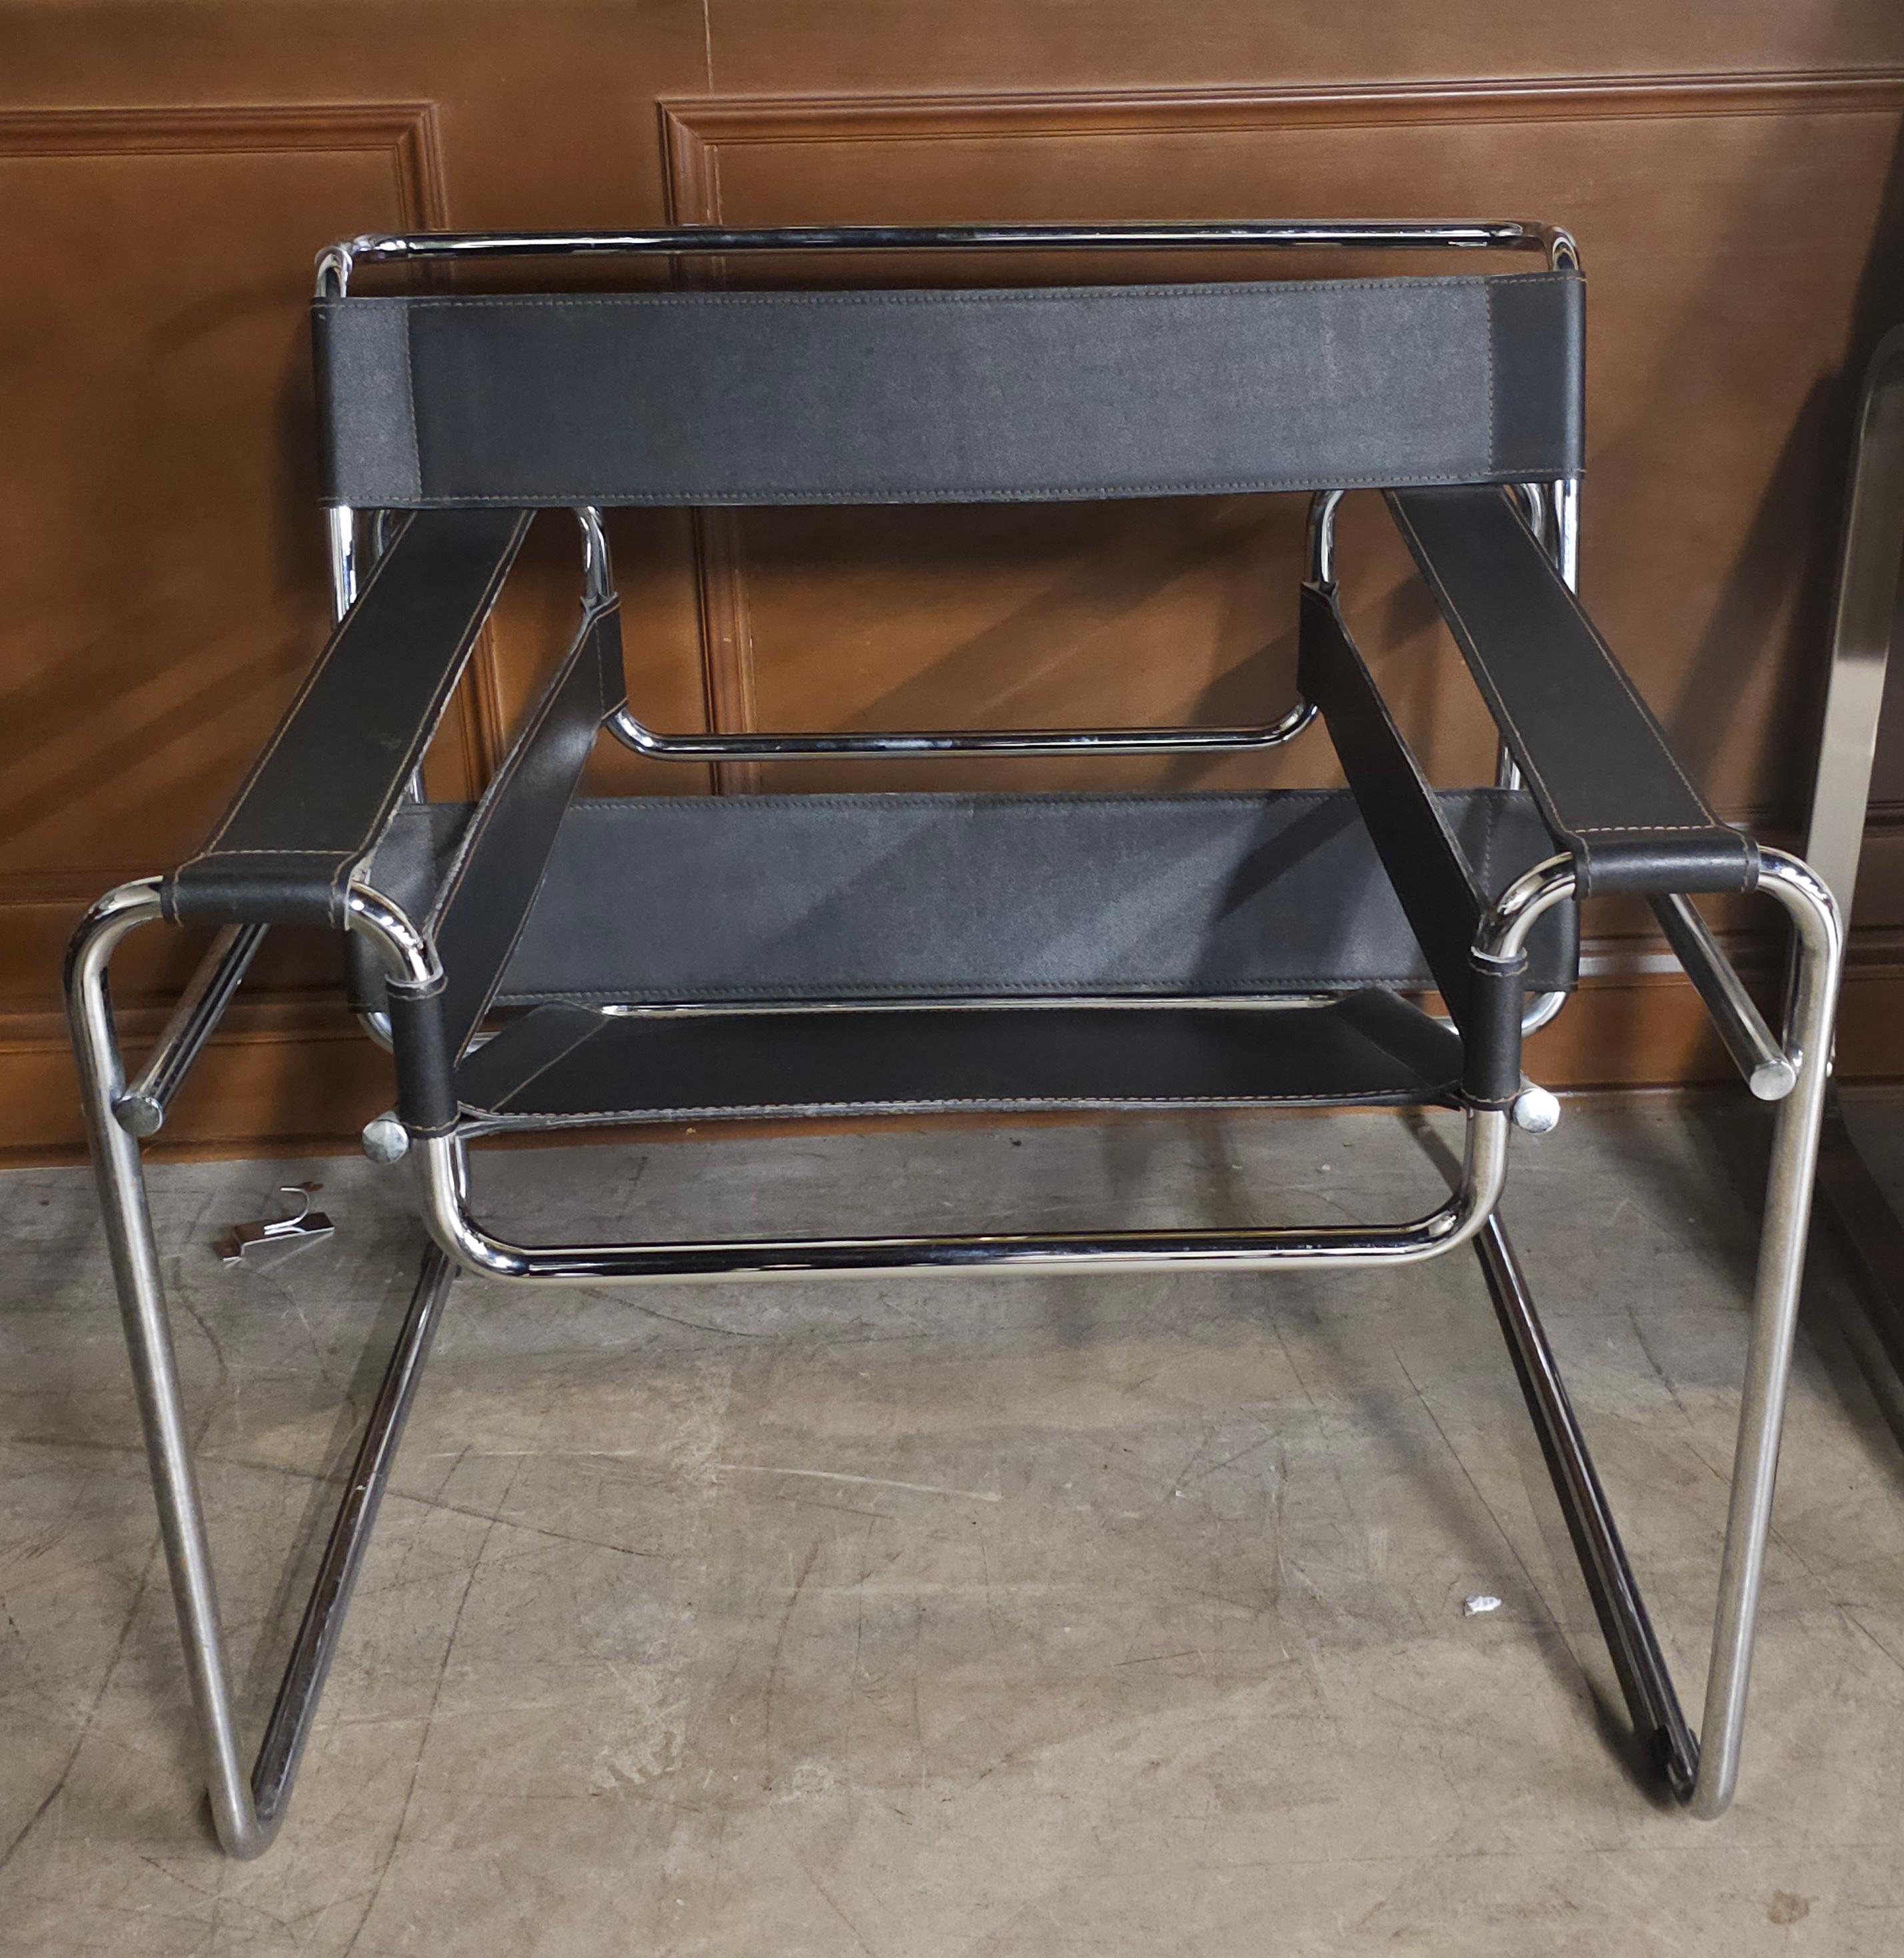 A Pair Marcel Brewer Chrome Metal And Leather Wassily Style Lounge Chairs. Very comfortable and in great shape. 